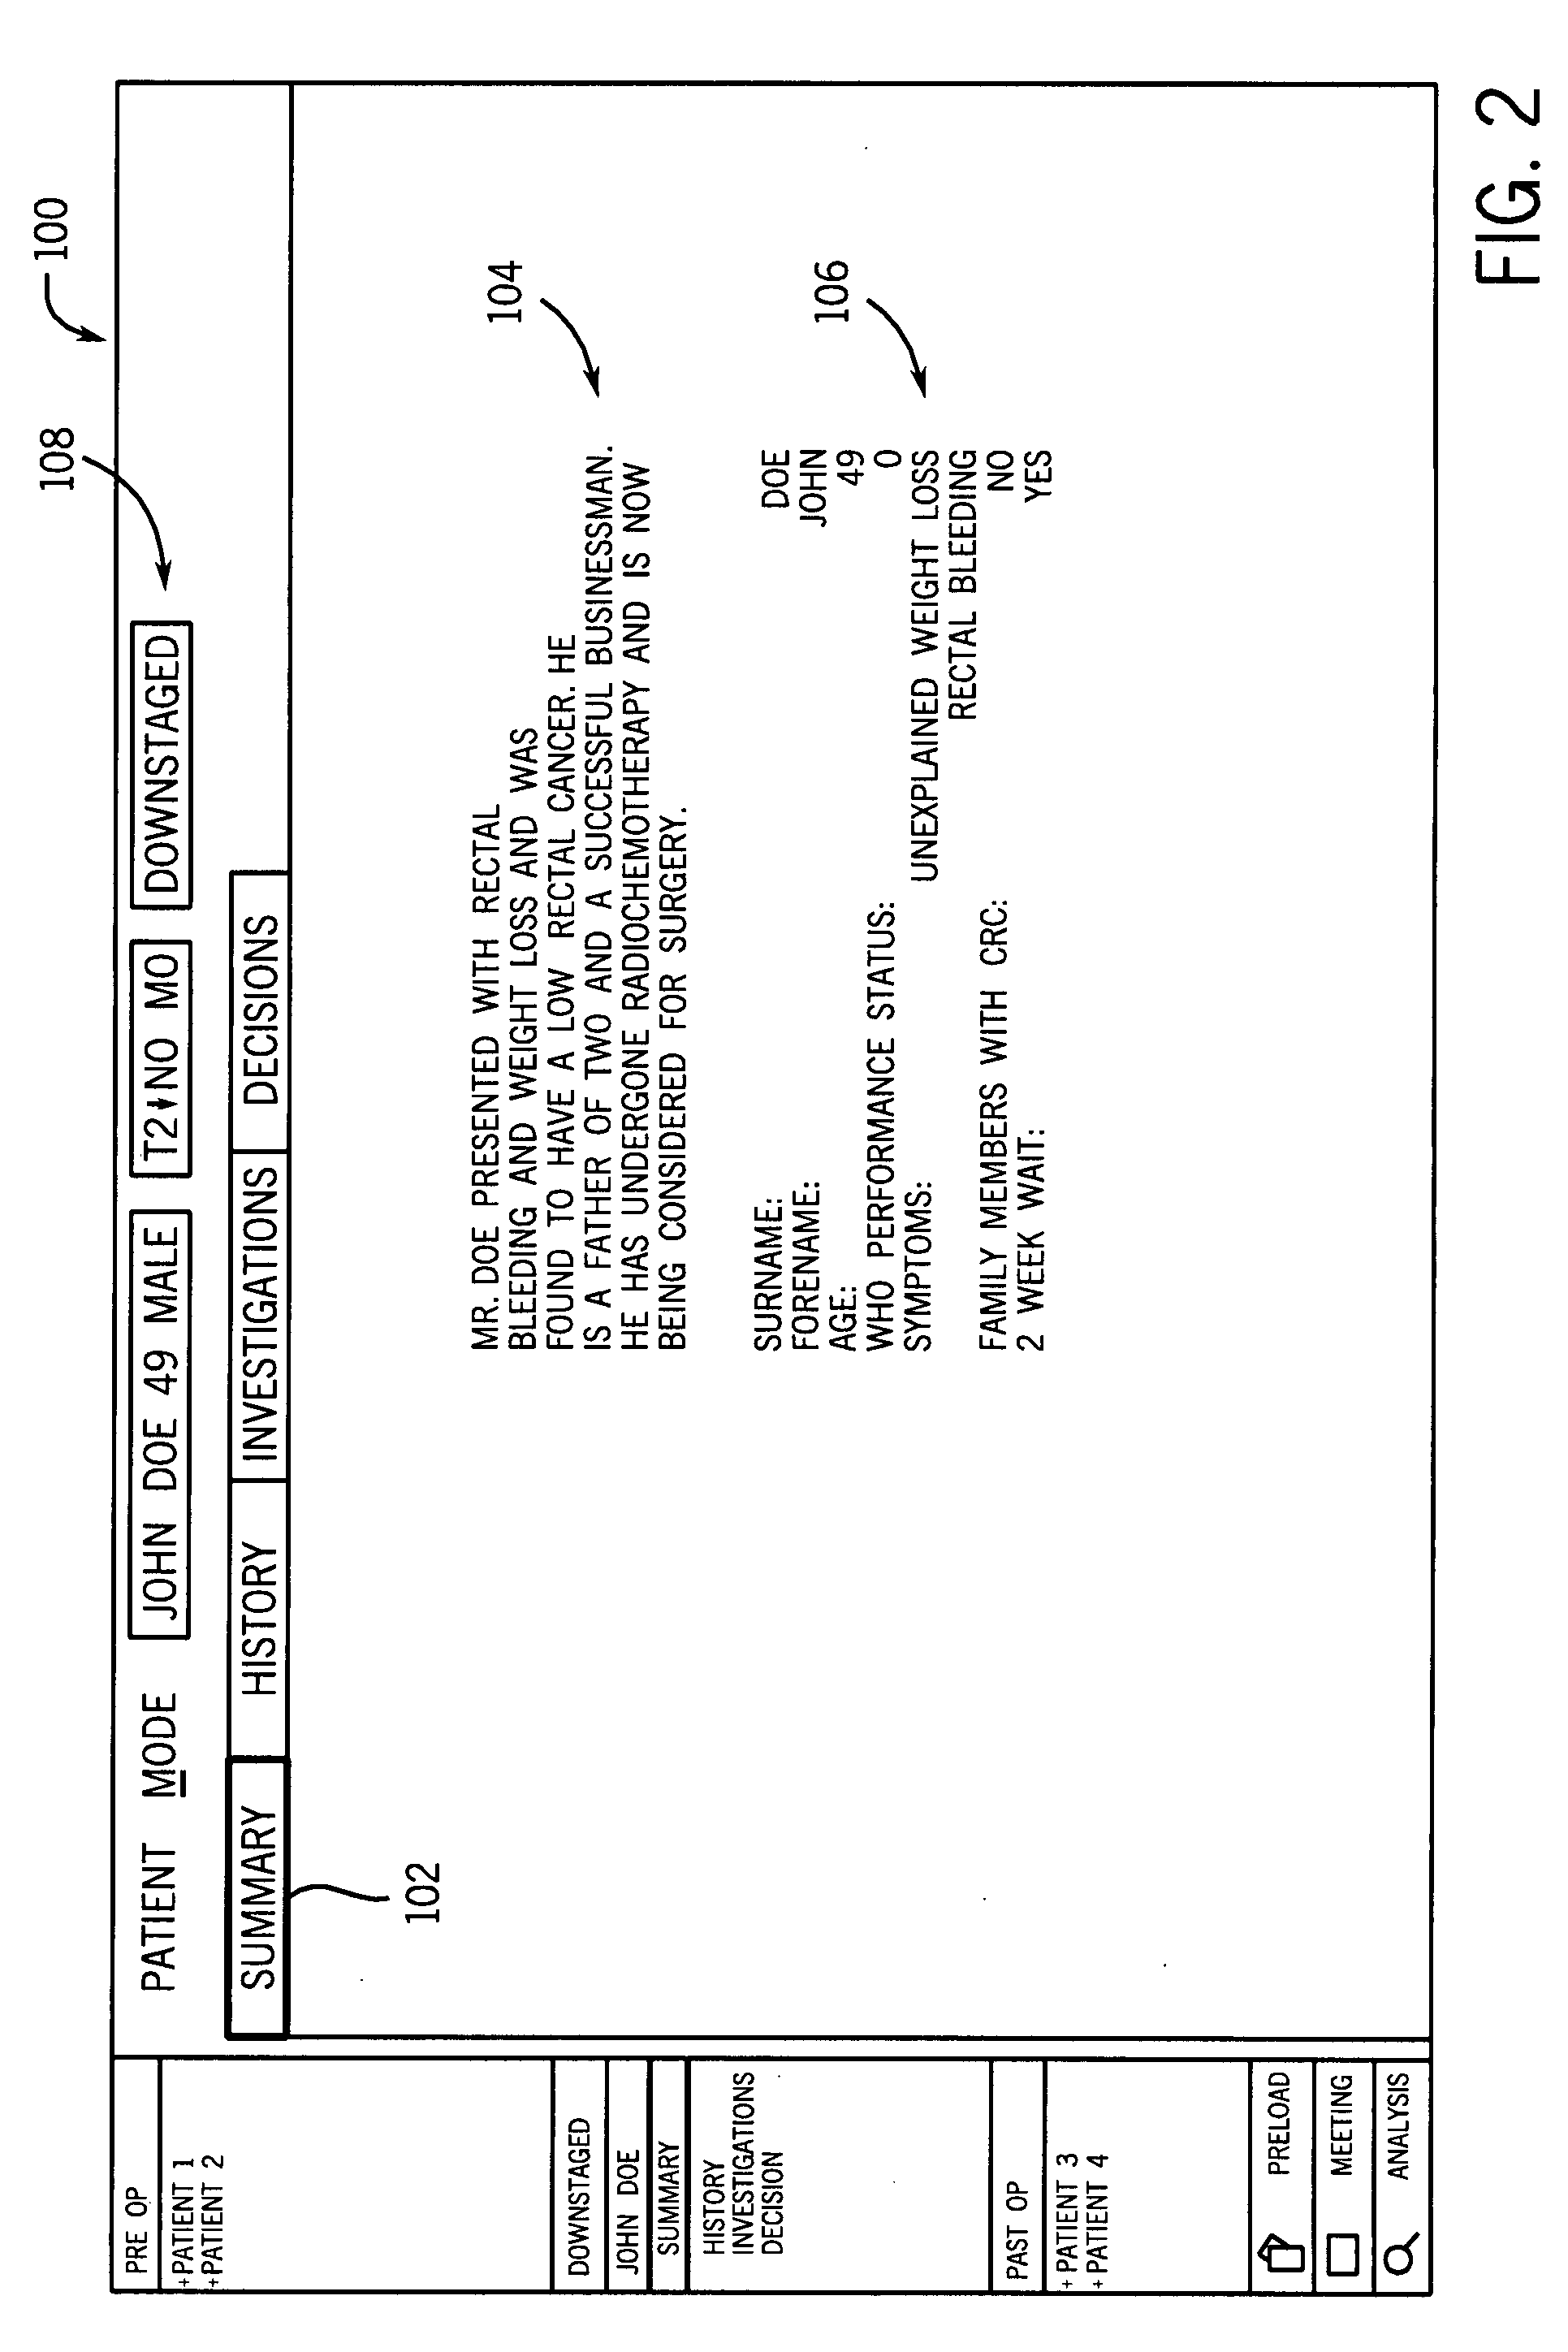 Method and system for supporting clinical decision-making